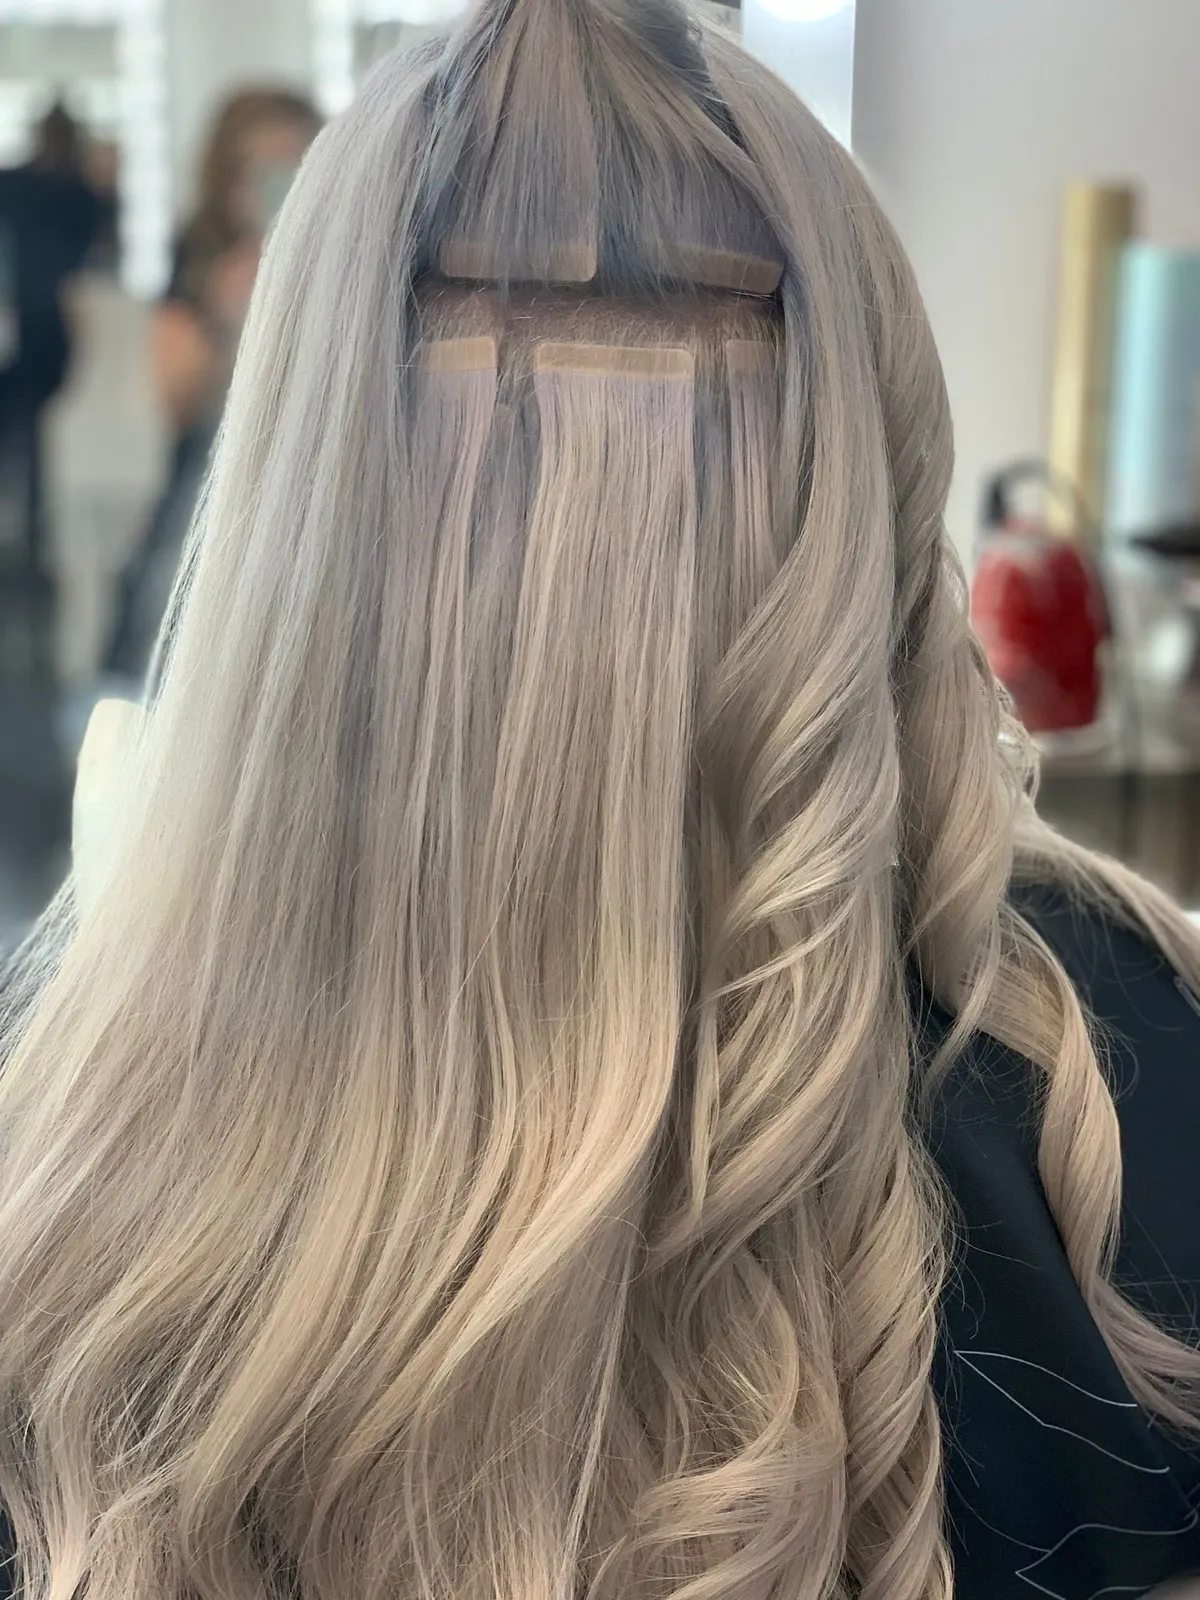 Process of Adding Professional Tape In Extensions to the Blond Hair in Louisville, KY